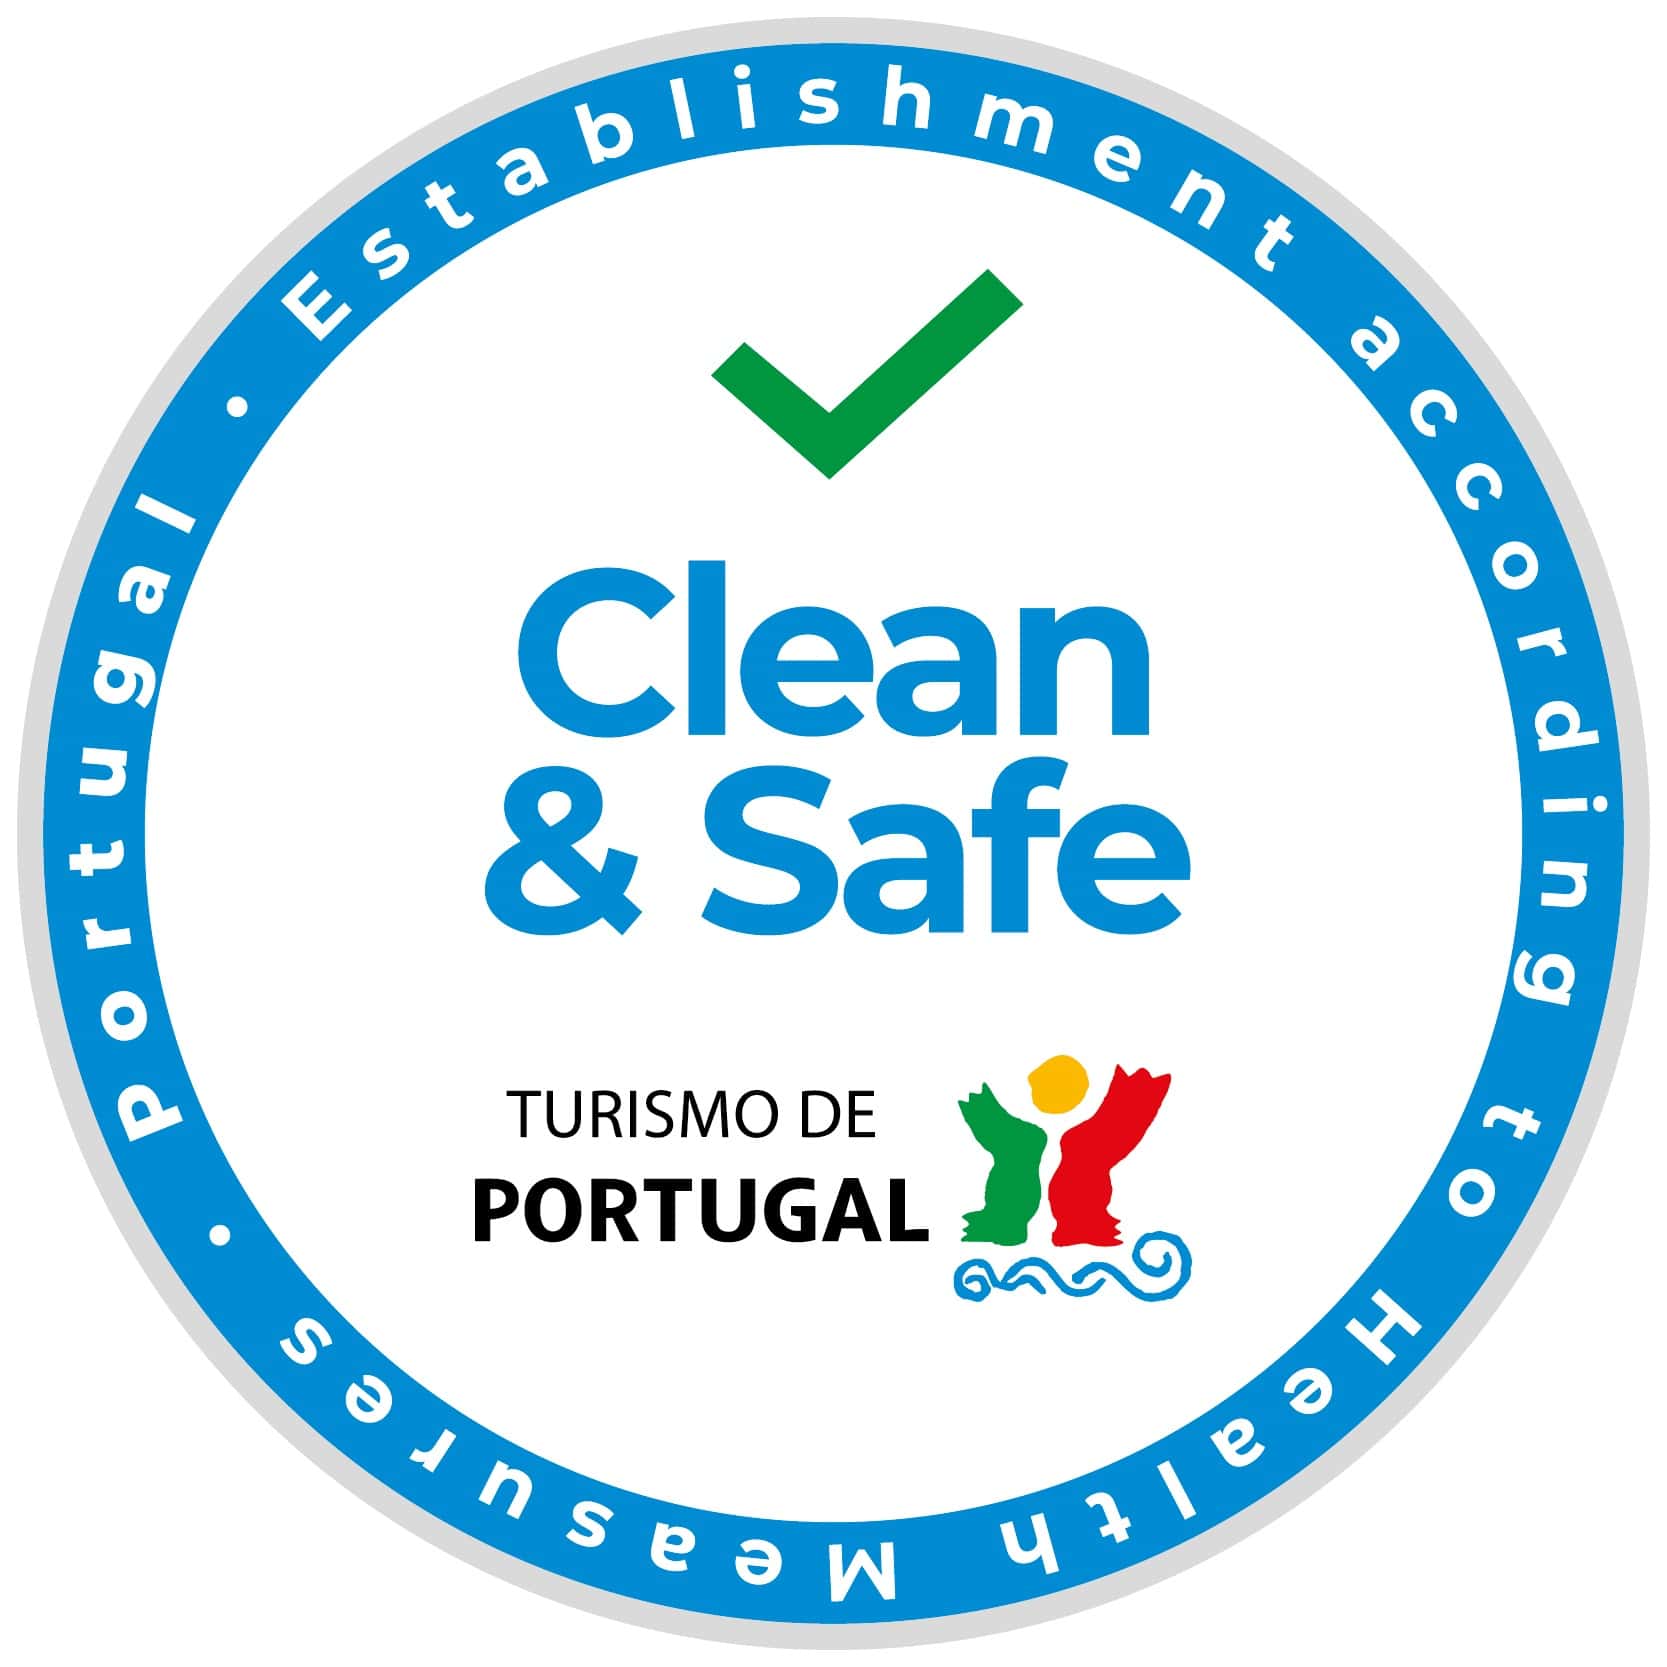 treasures of lisboa food tours in lisbon is recognised as clean and safe